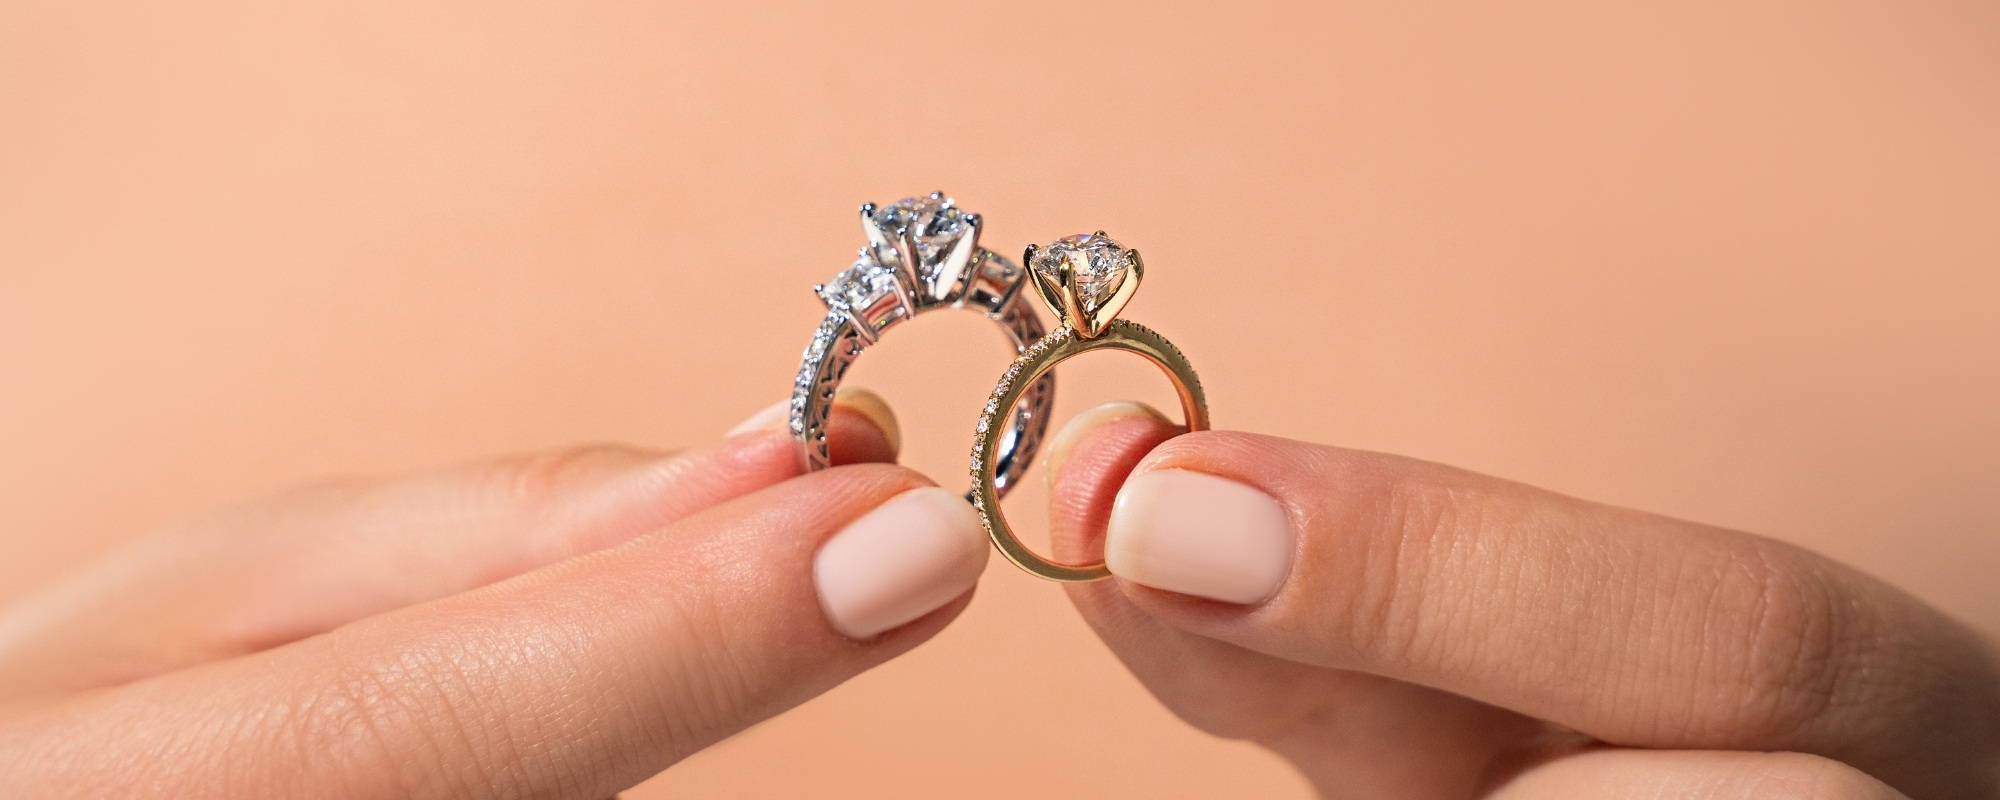 Your Dream Wedding Ring: How to Make It a Reality